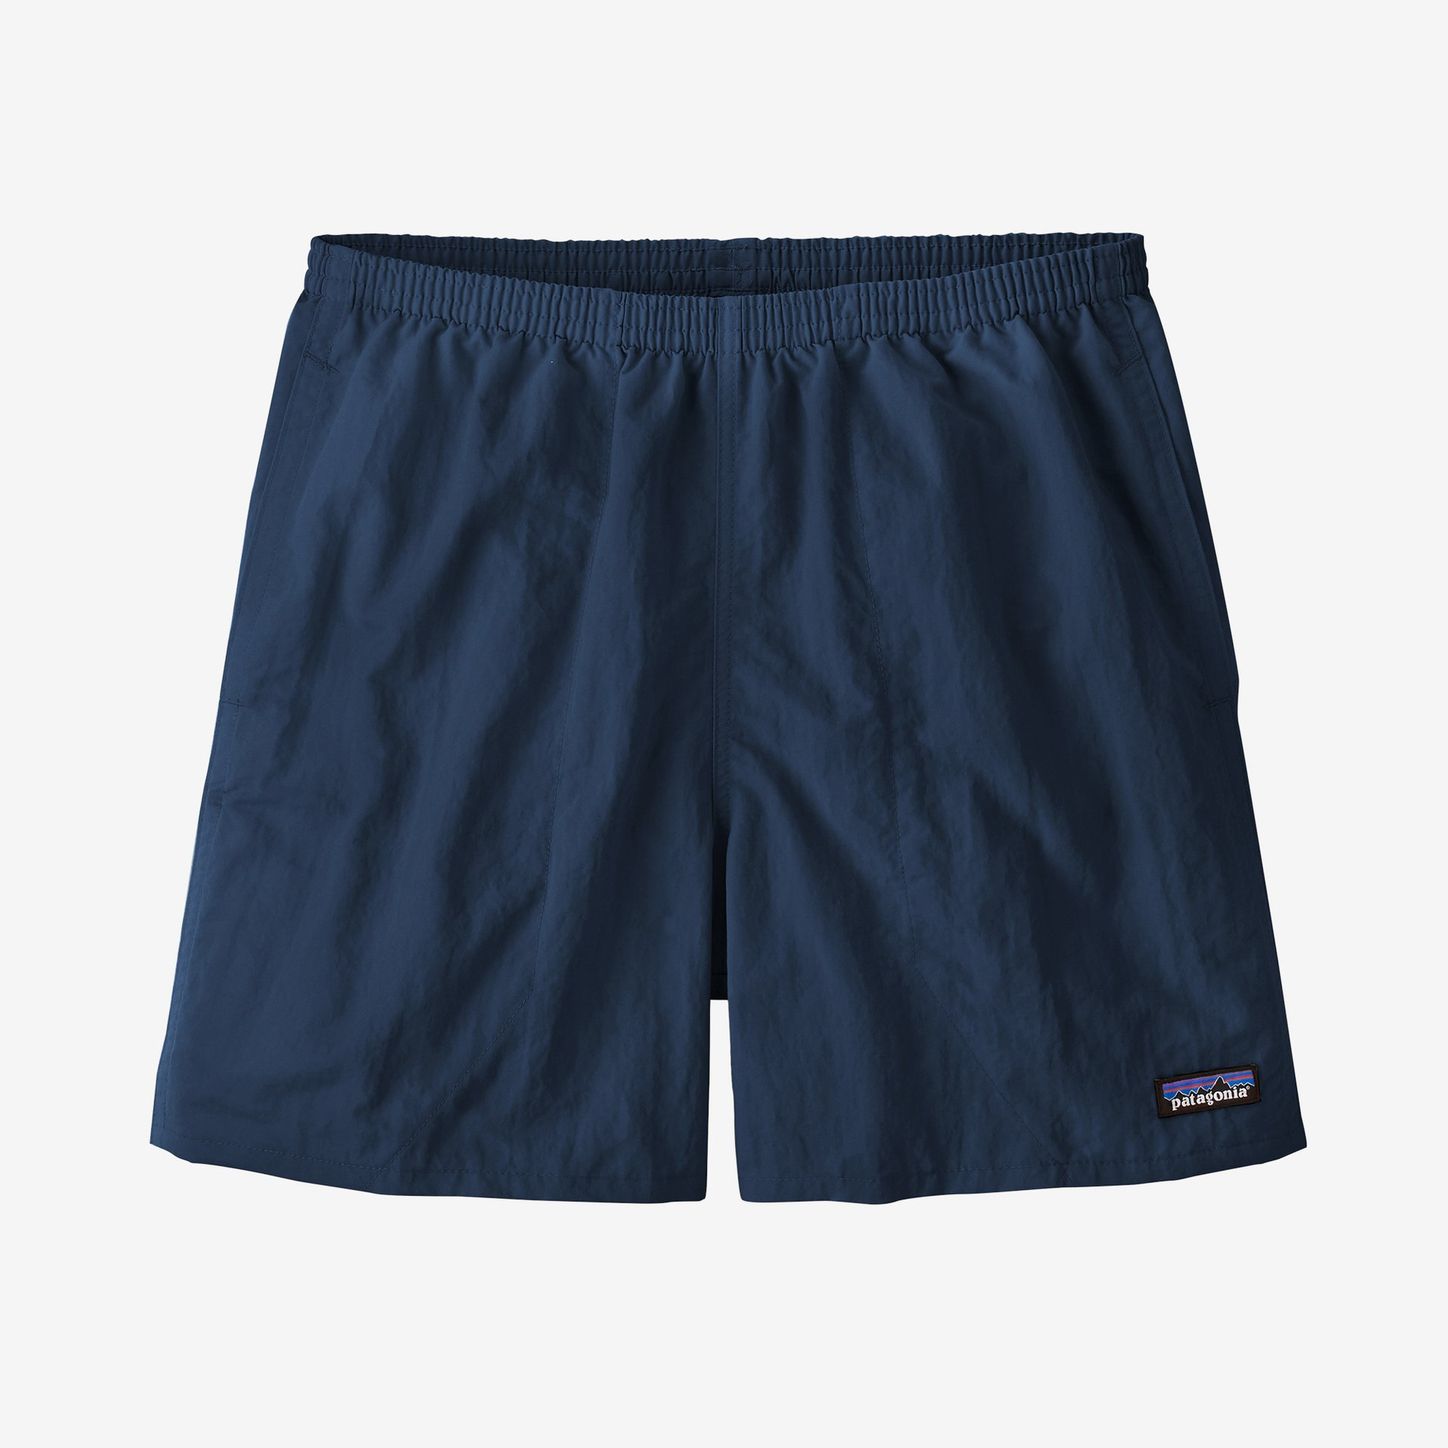 Any know what these essential loose training shorts are like